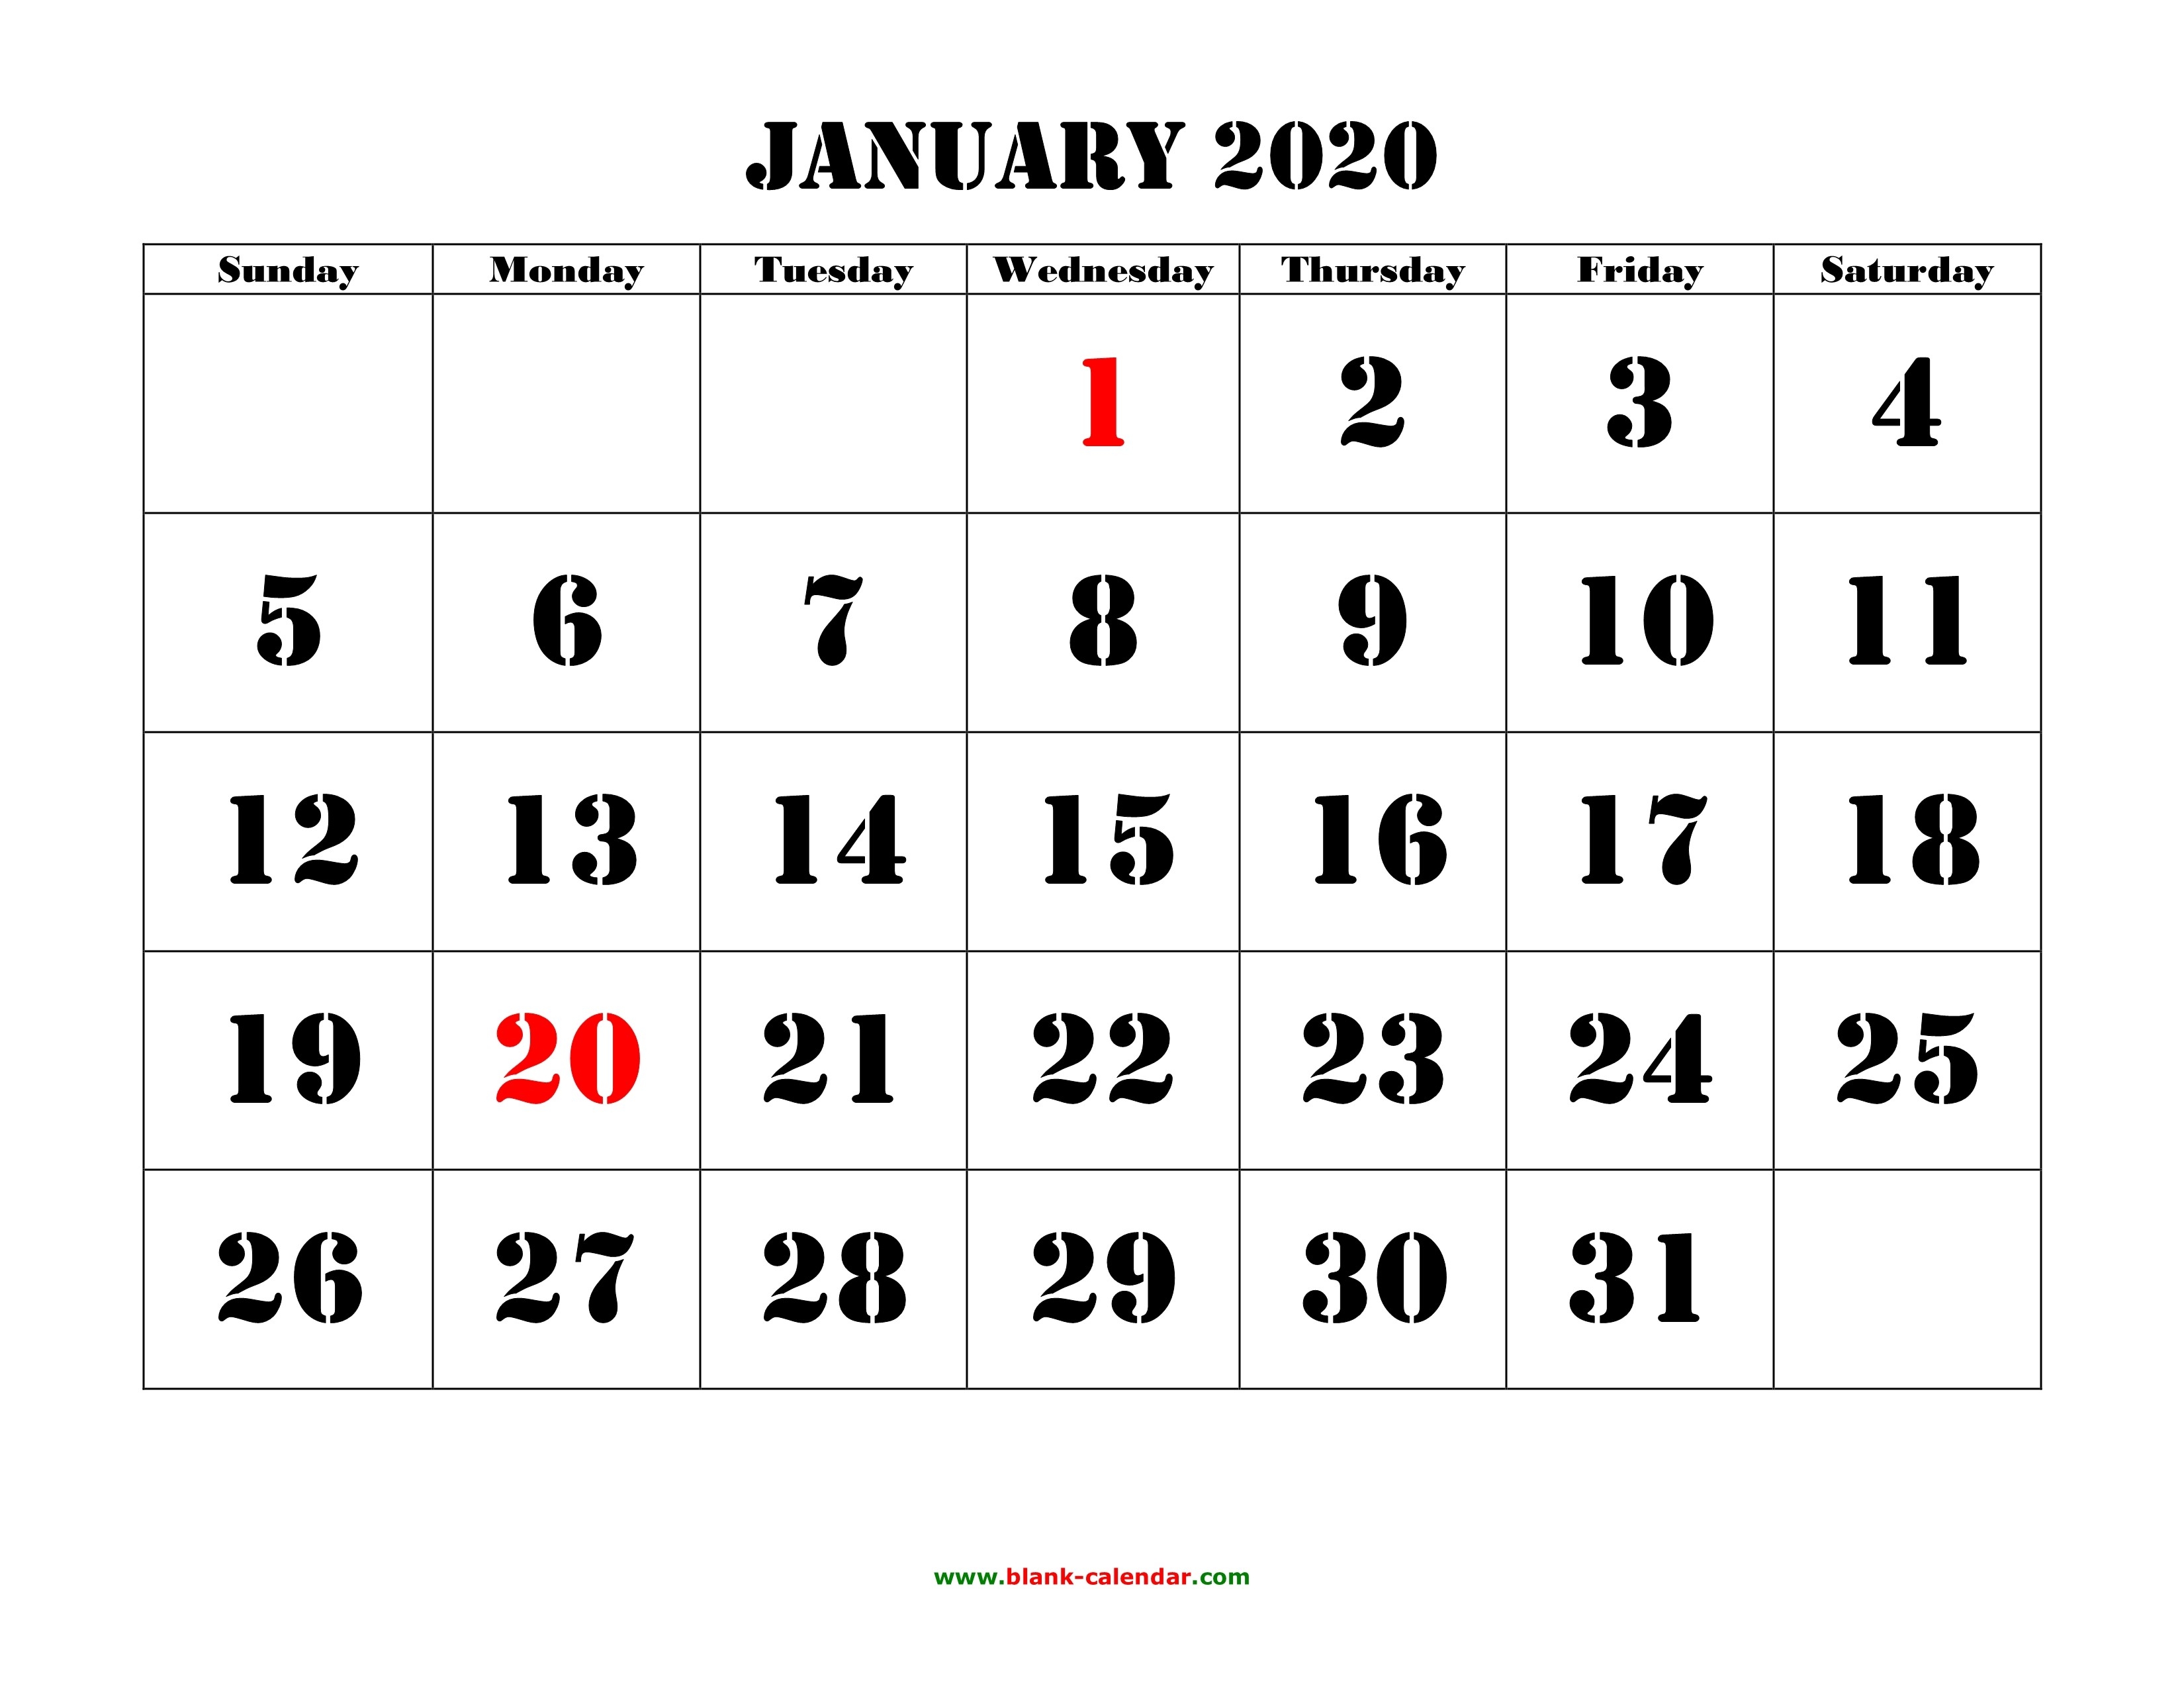 Printable Calendar 2020 | Free Download Yearly Calendar-2020 2 Page Monthly Calendar Printable